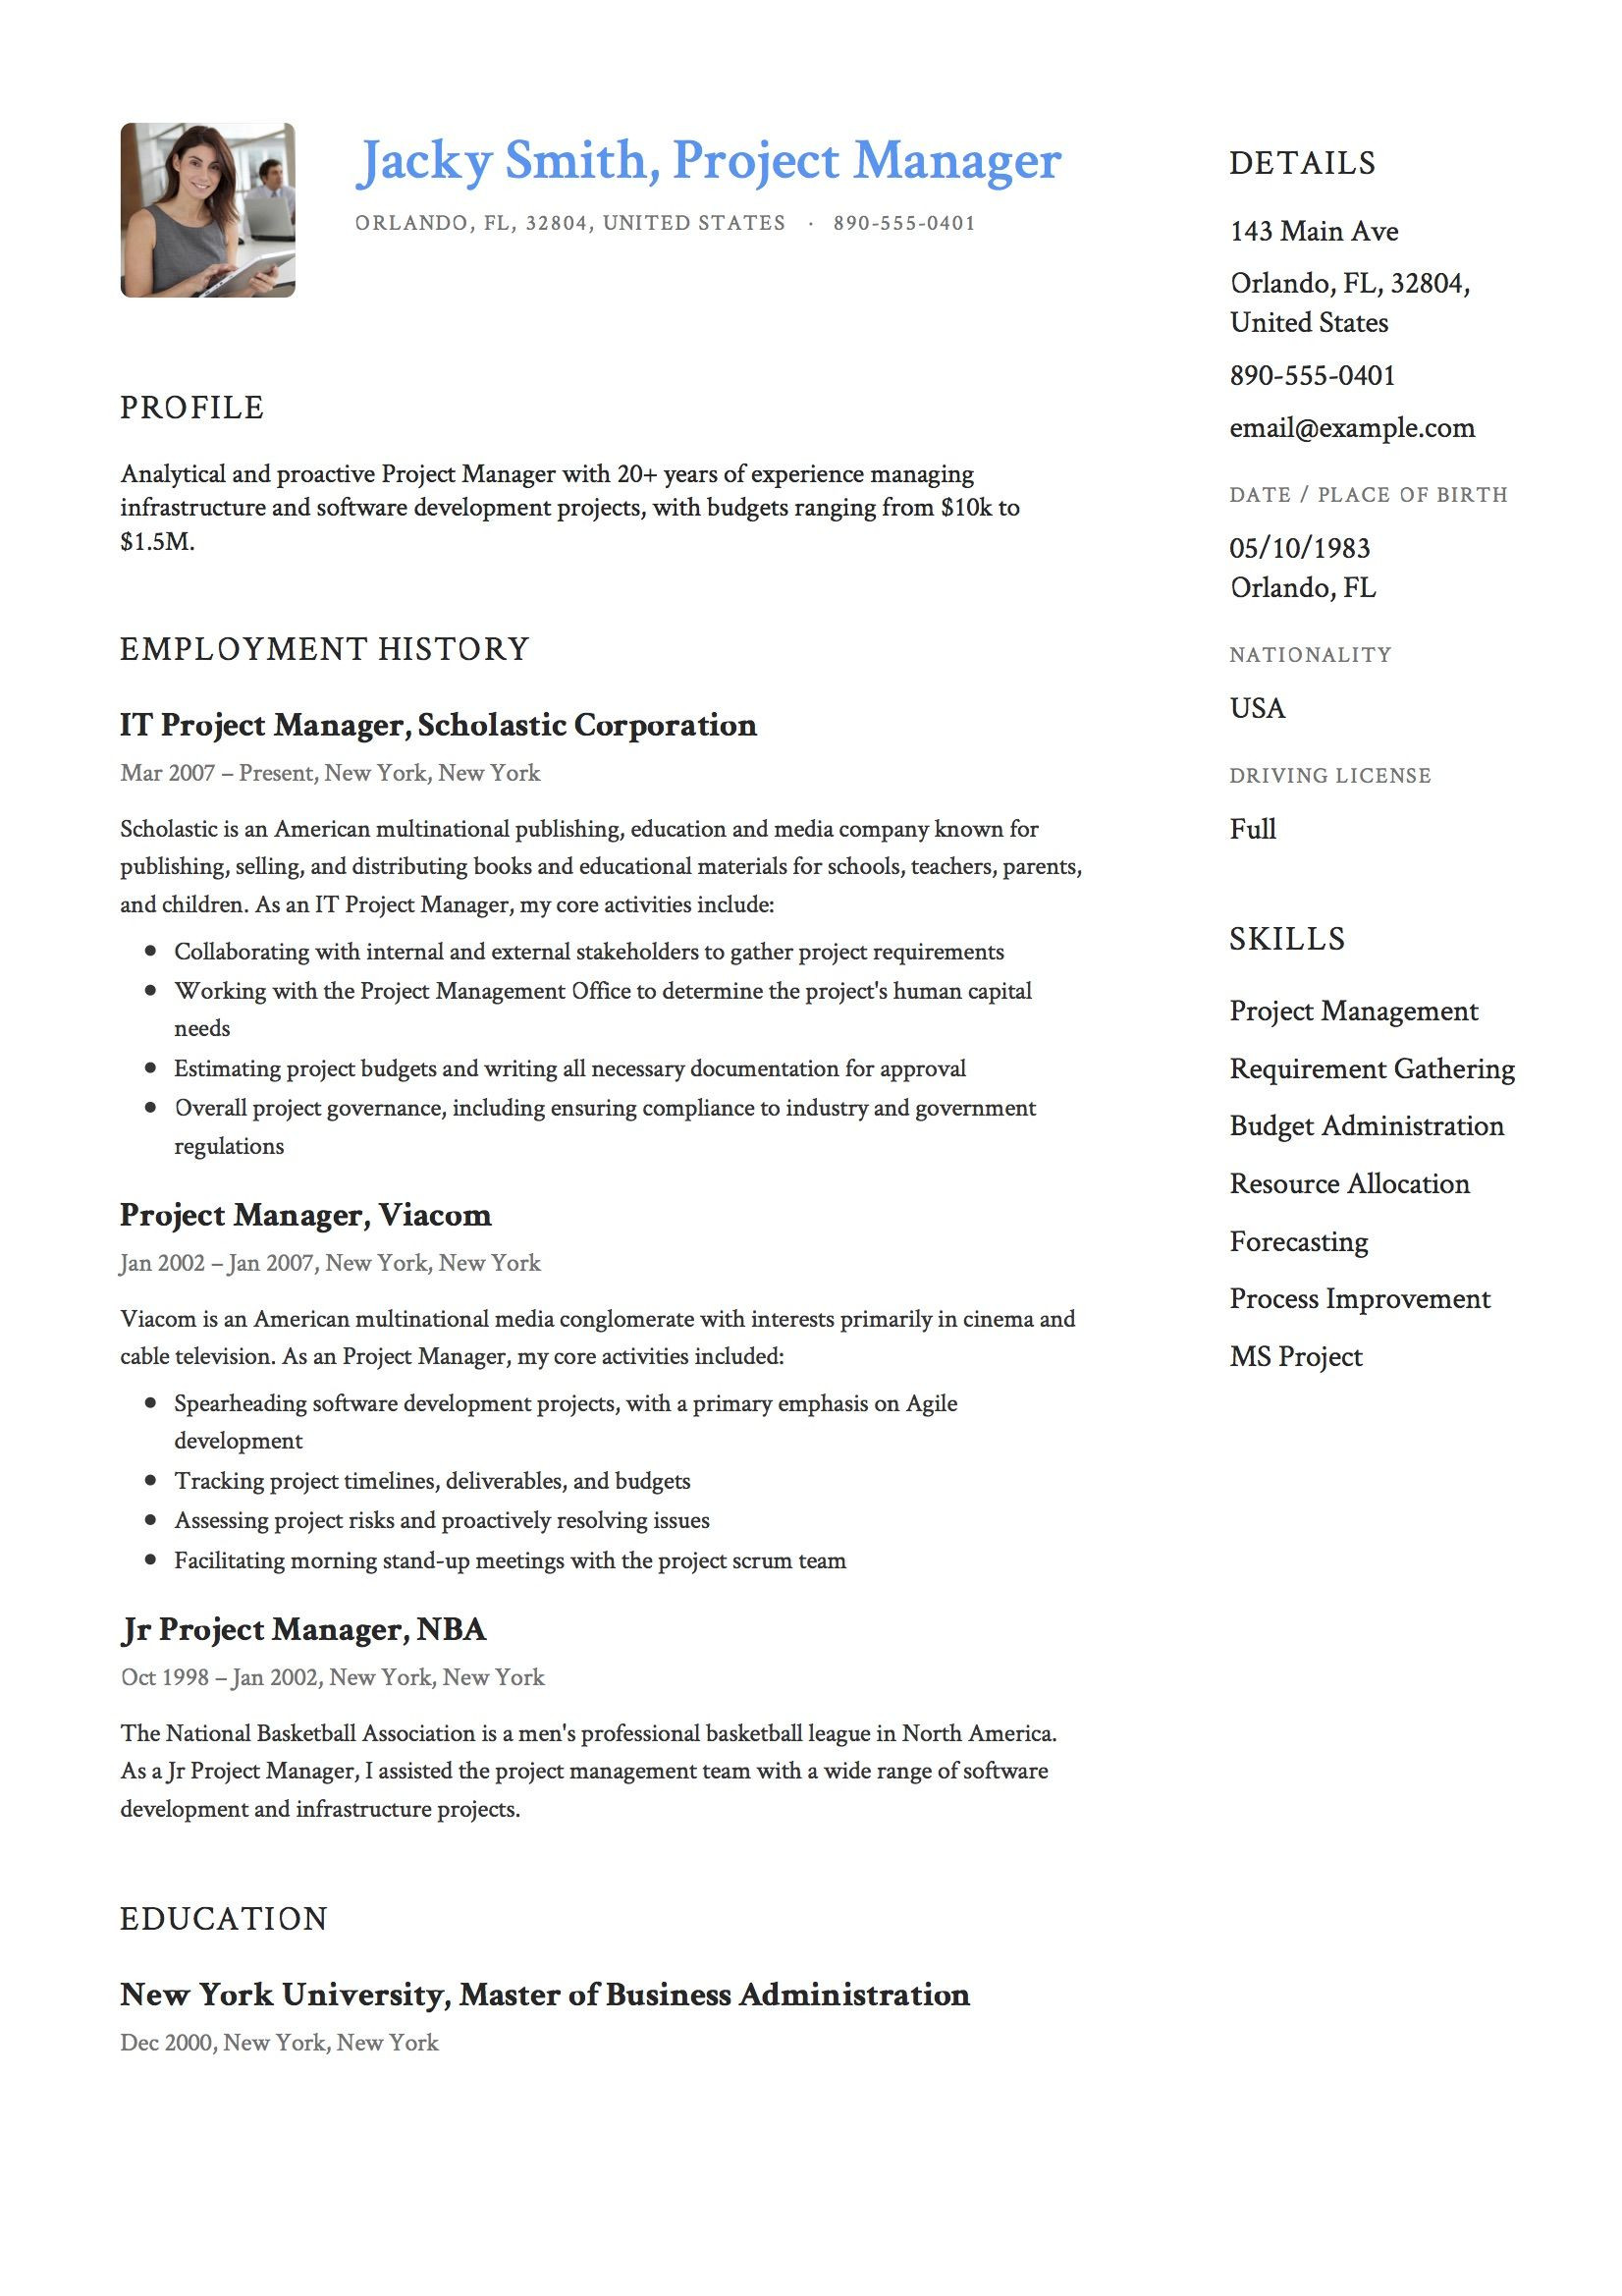 Sample Resume for Project Manager It software India 12 Project Manager Resume Examples & Templates Ideas Project …